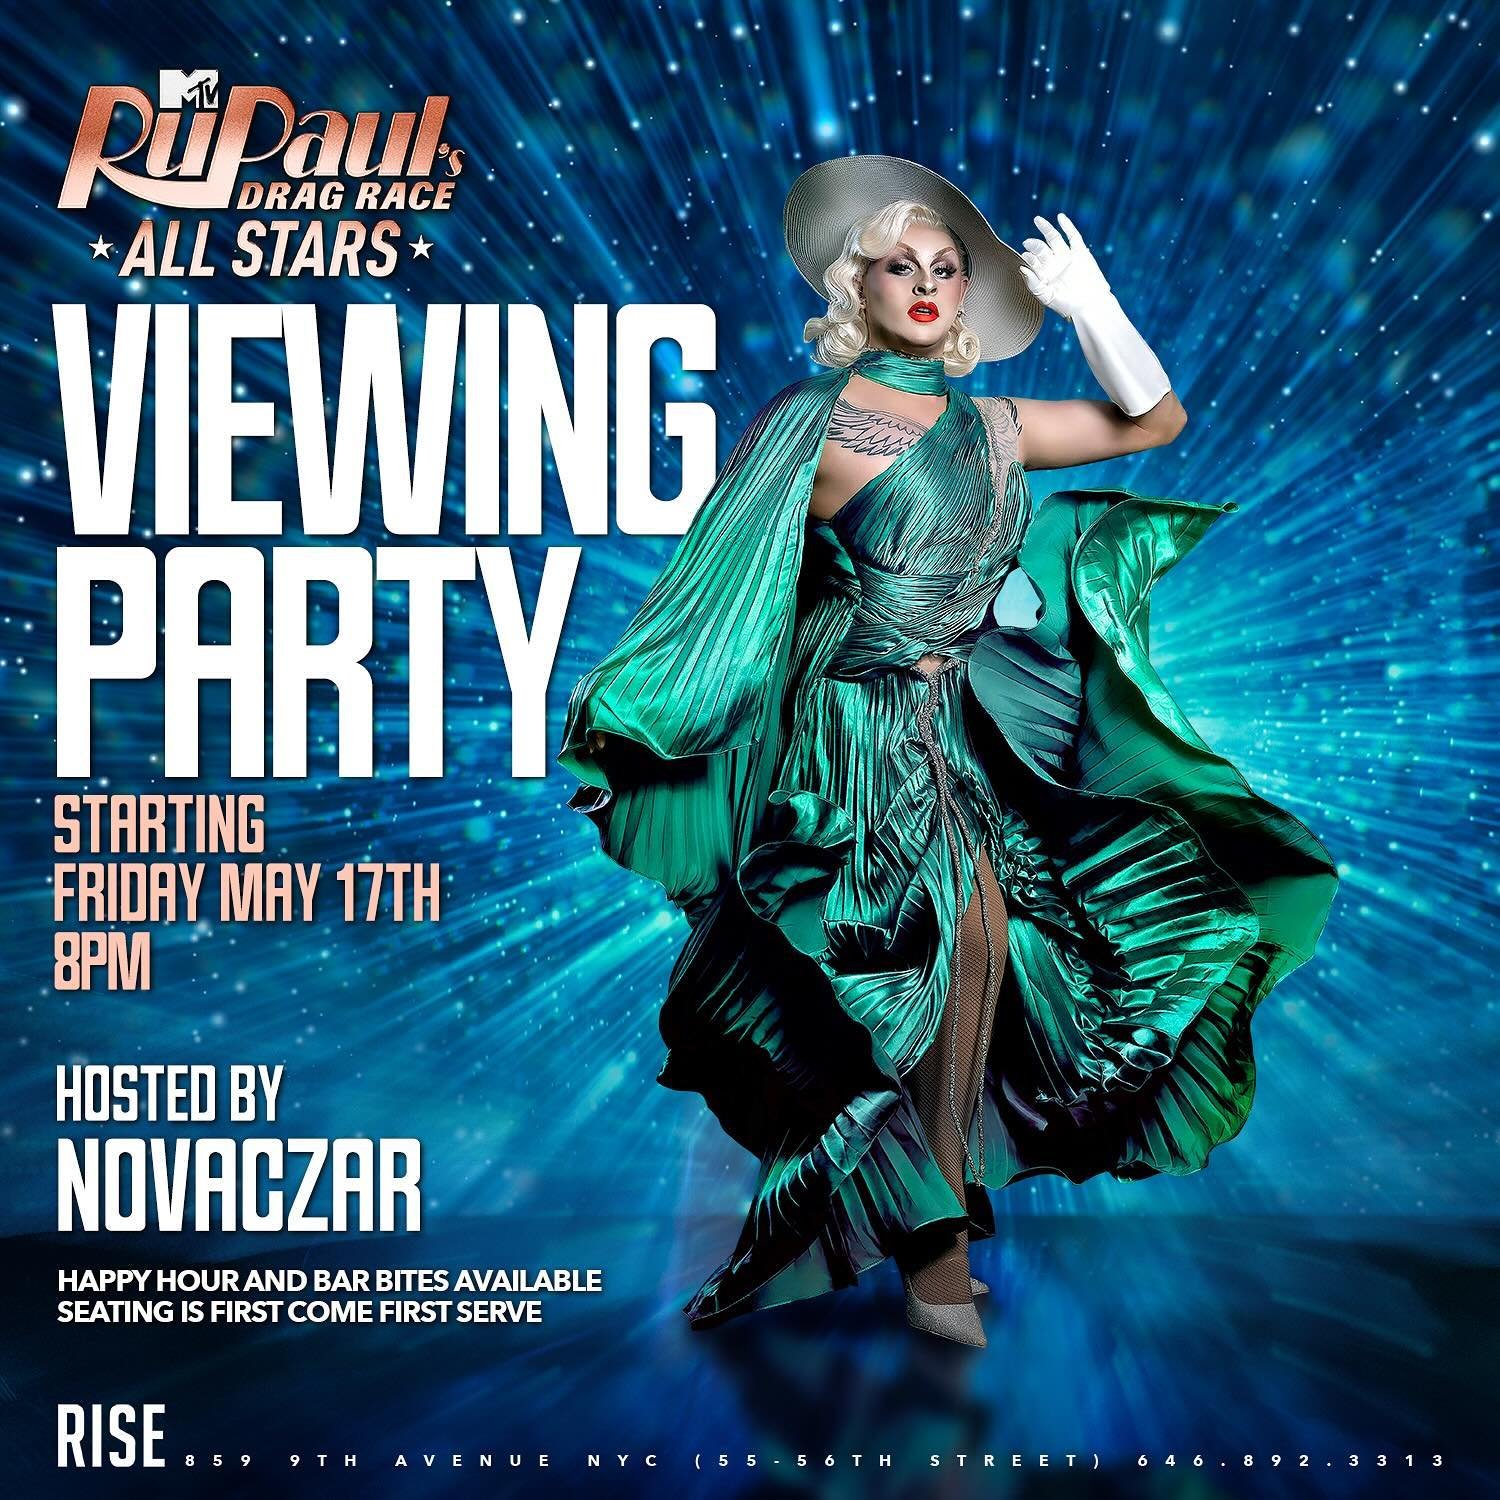 TONIGHT at Rise! Our RPDR All Stars Viewing Party is BACK with Host Novaczar! Show time at 8pm with Happy Hour until 9!